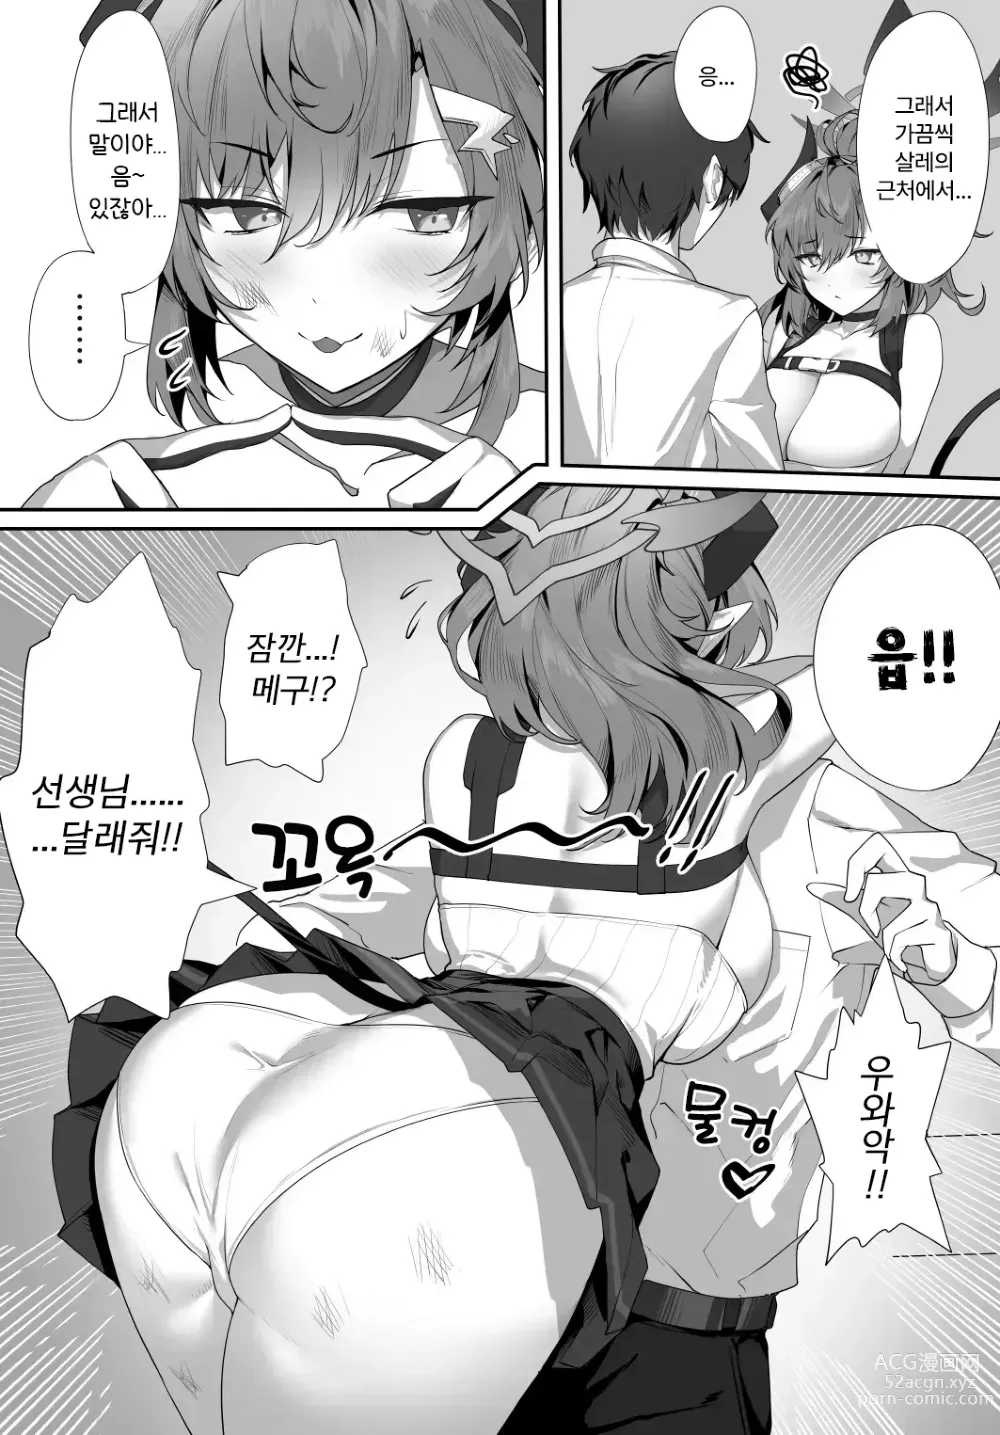 Page 5 of doujinshi 알려줘